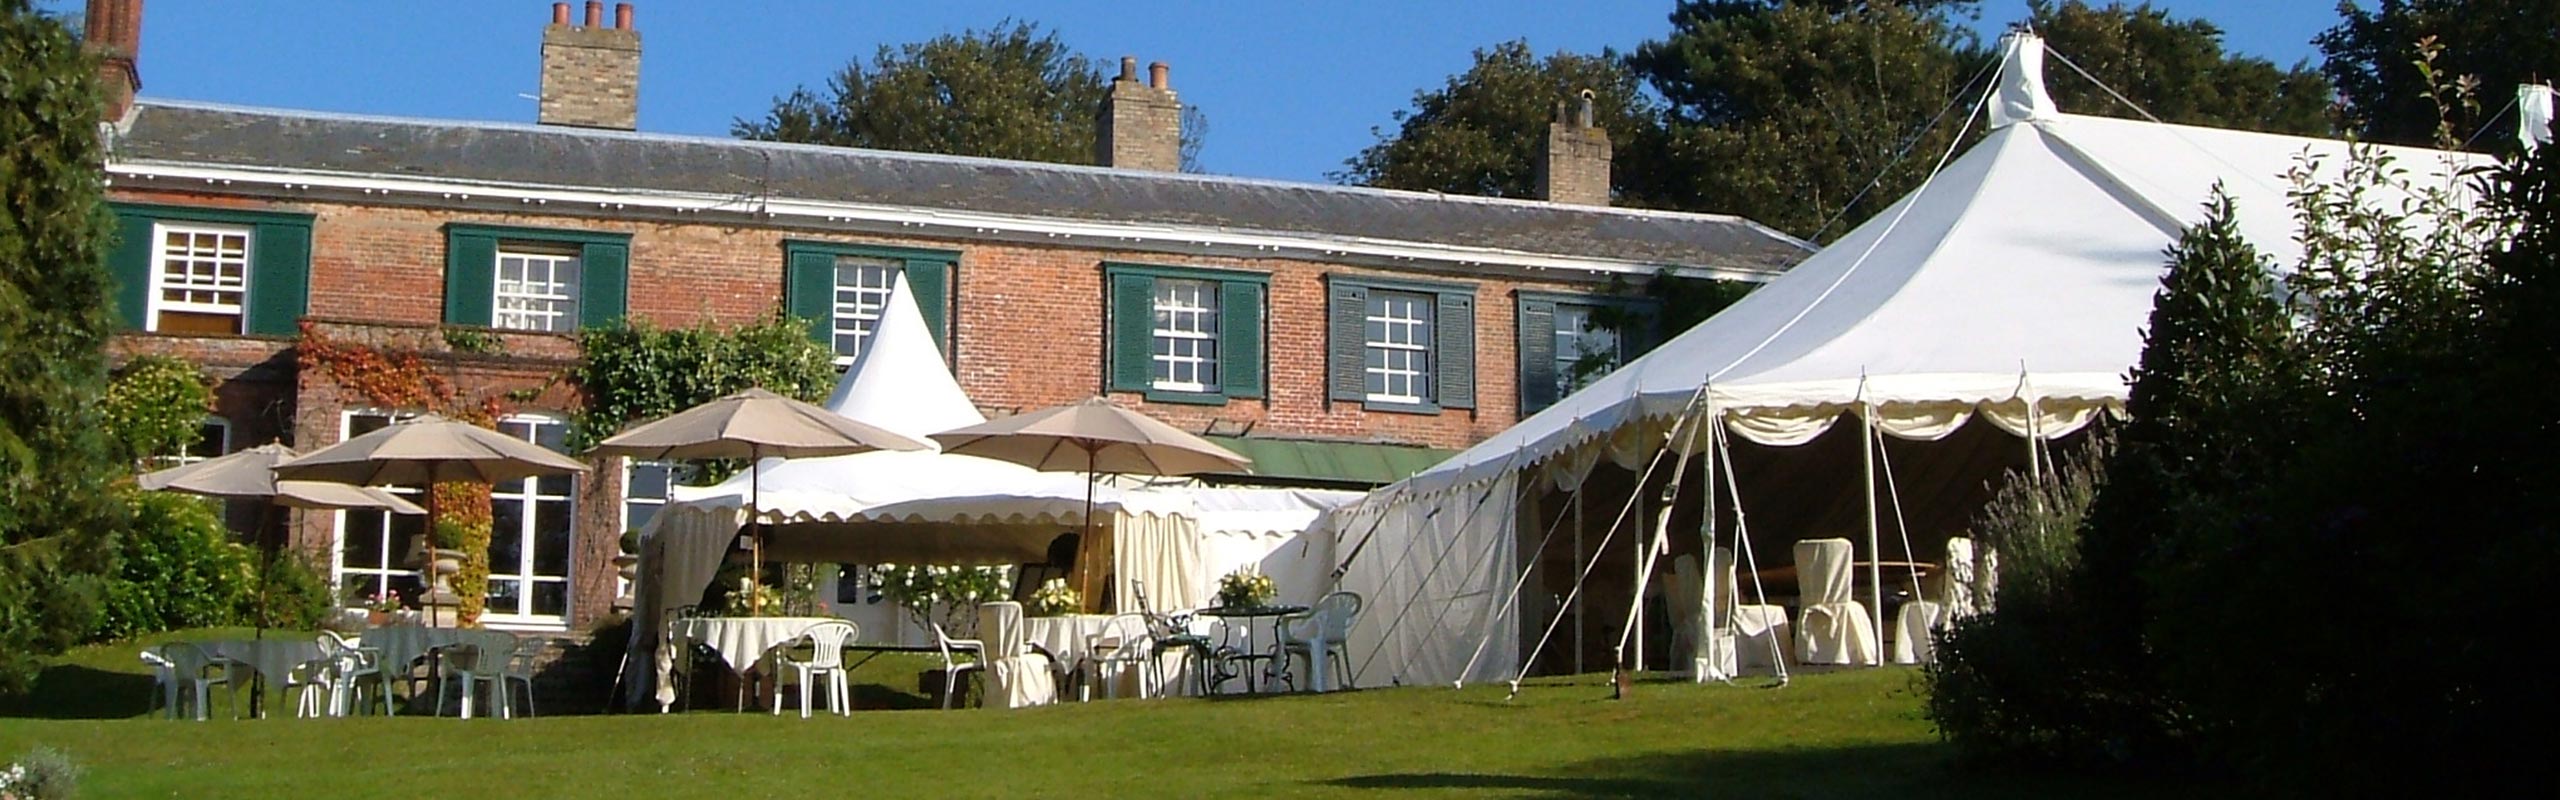 Marquee hire In Bury St Edmunds